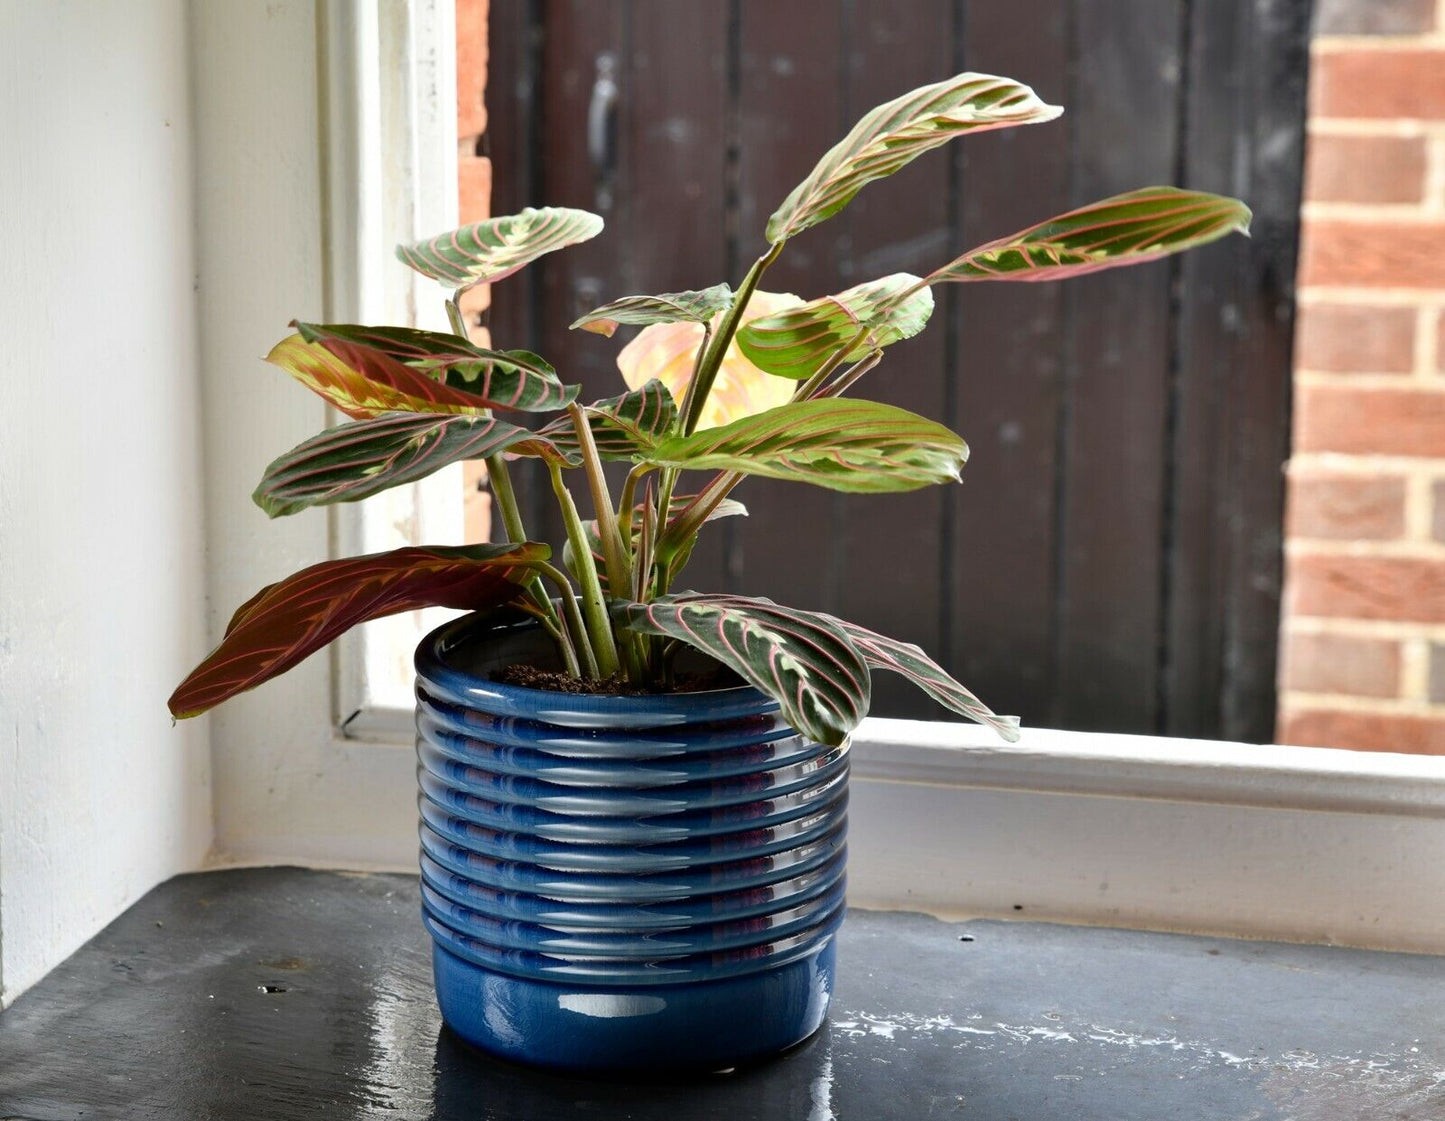 Burgon & Ball OSLO Indoor House Plant Pots - Grey or Blue - Large or Small